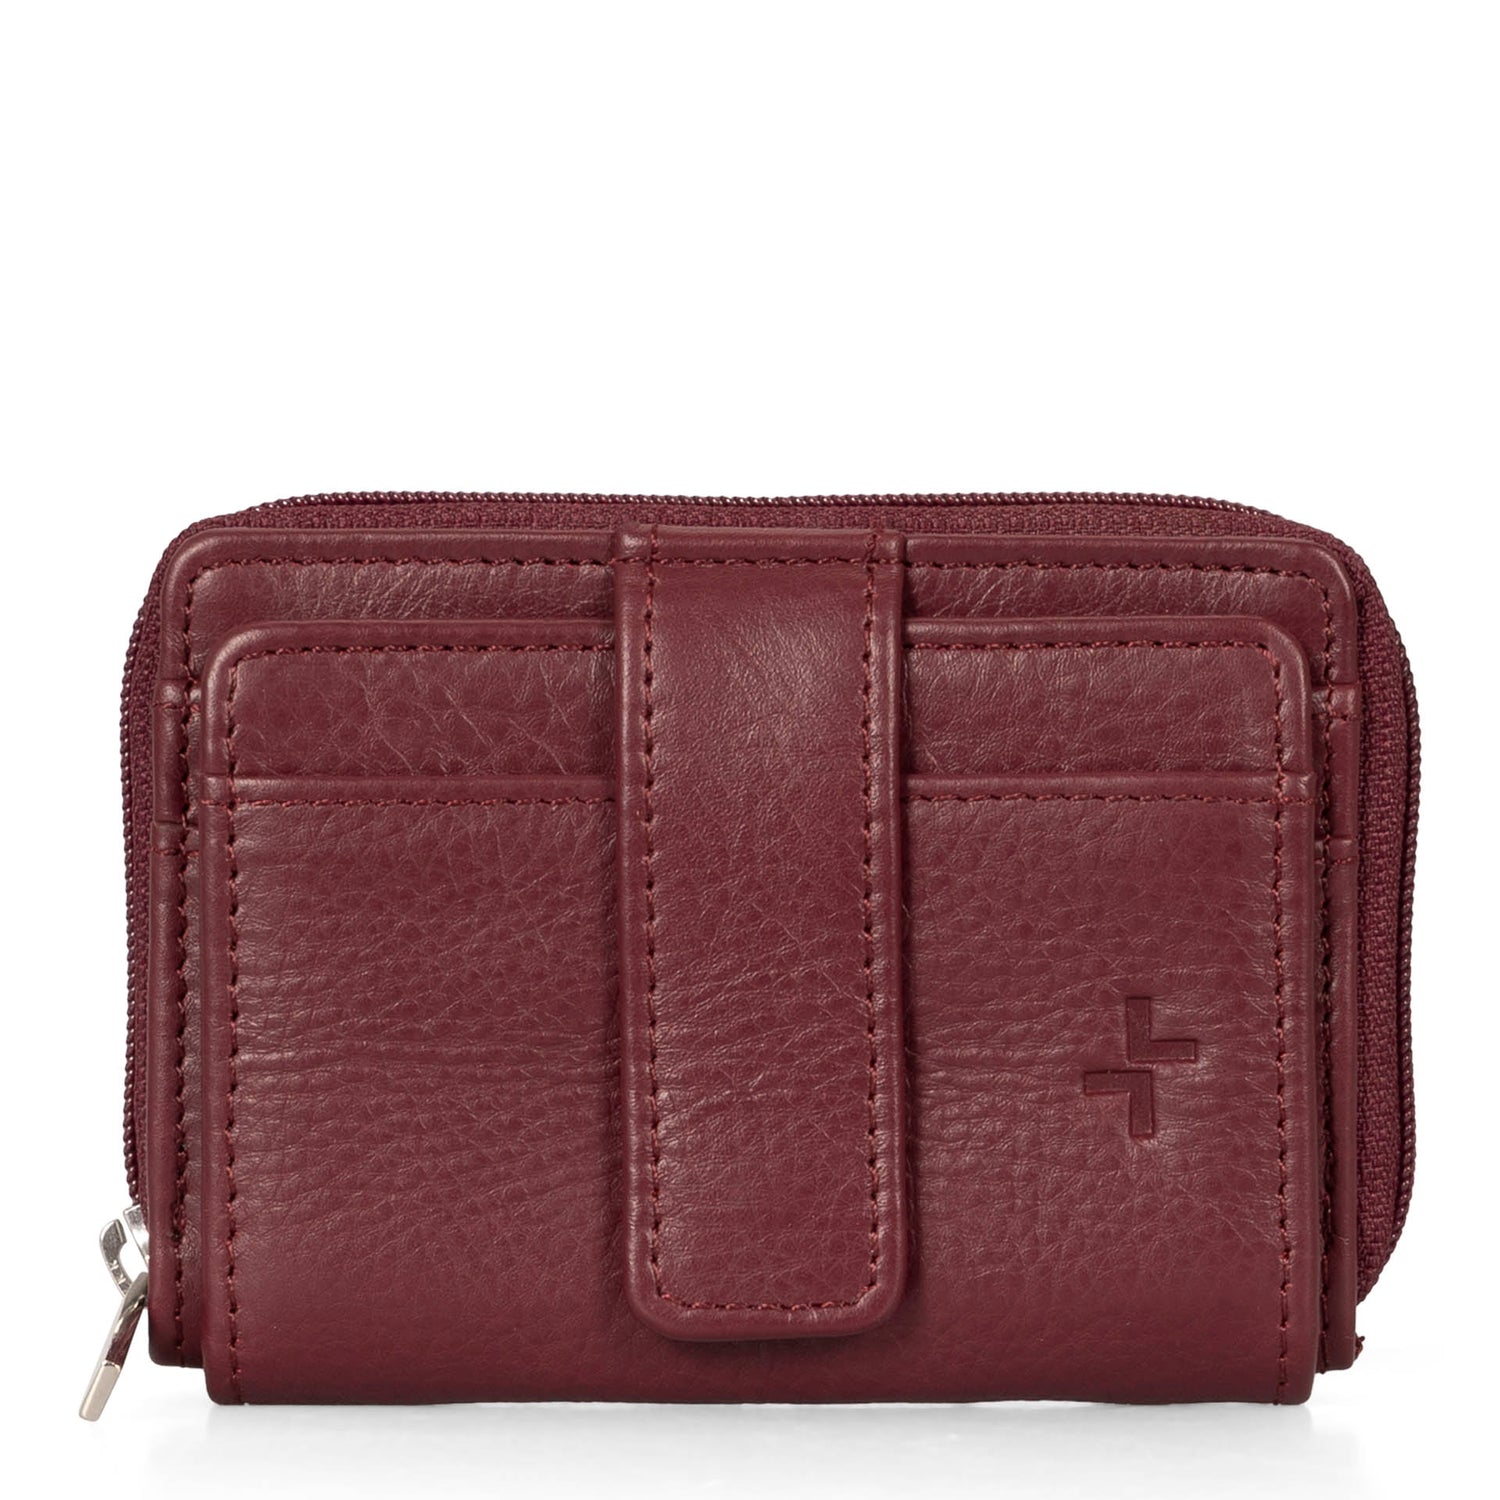 Front side of a burgundy card holder called basics by tracker, showing its 2 front card slots and closure strap.